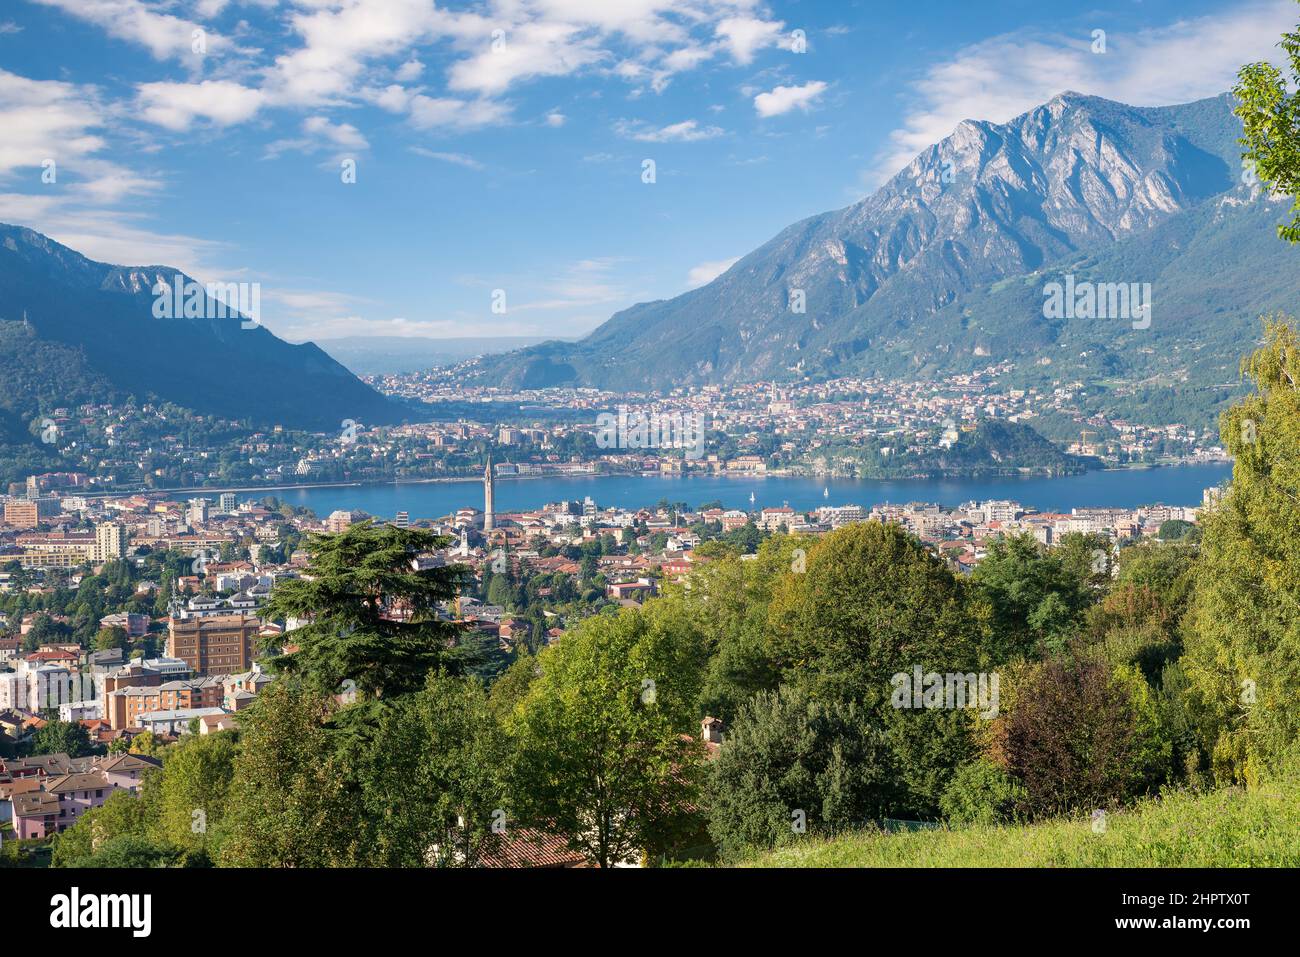 Lake Como and the city of Lecco, italy Stock Photo